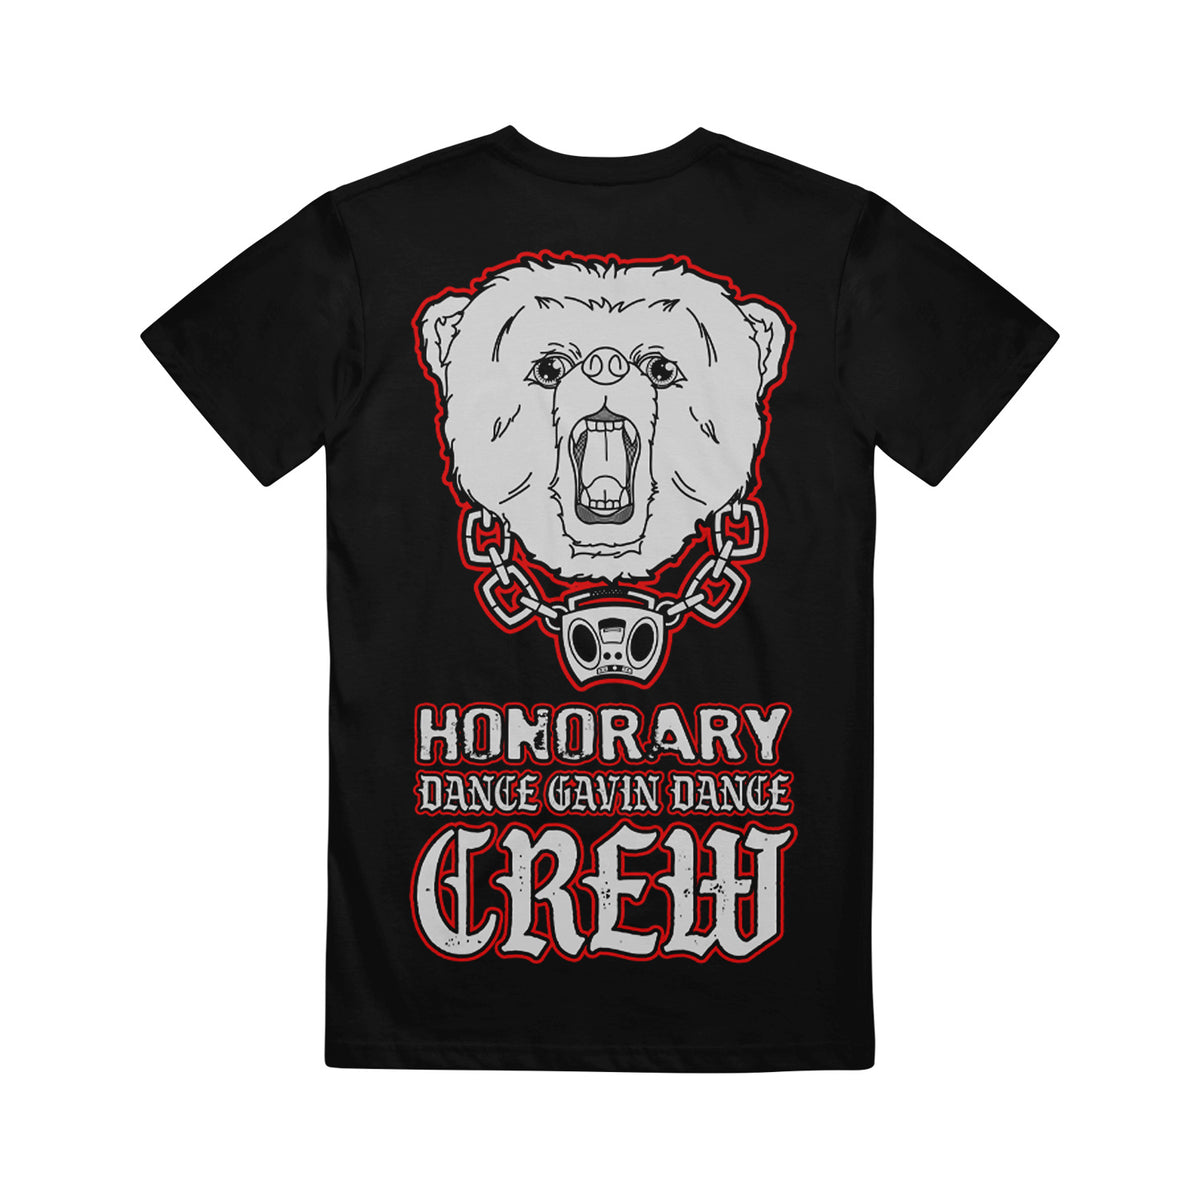 image of the back of a black tee shirt on a white background. tee has full print of a bear head wearing a chain necklace. below says honorary dance gavin dance crew